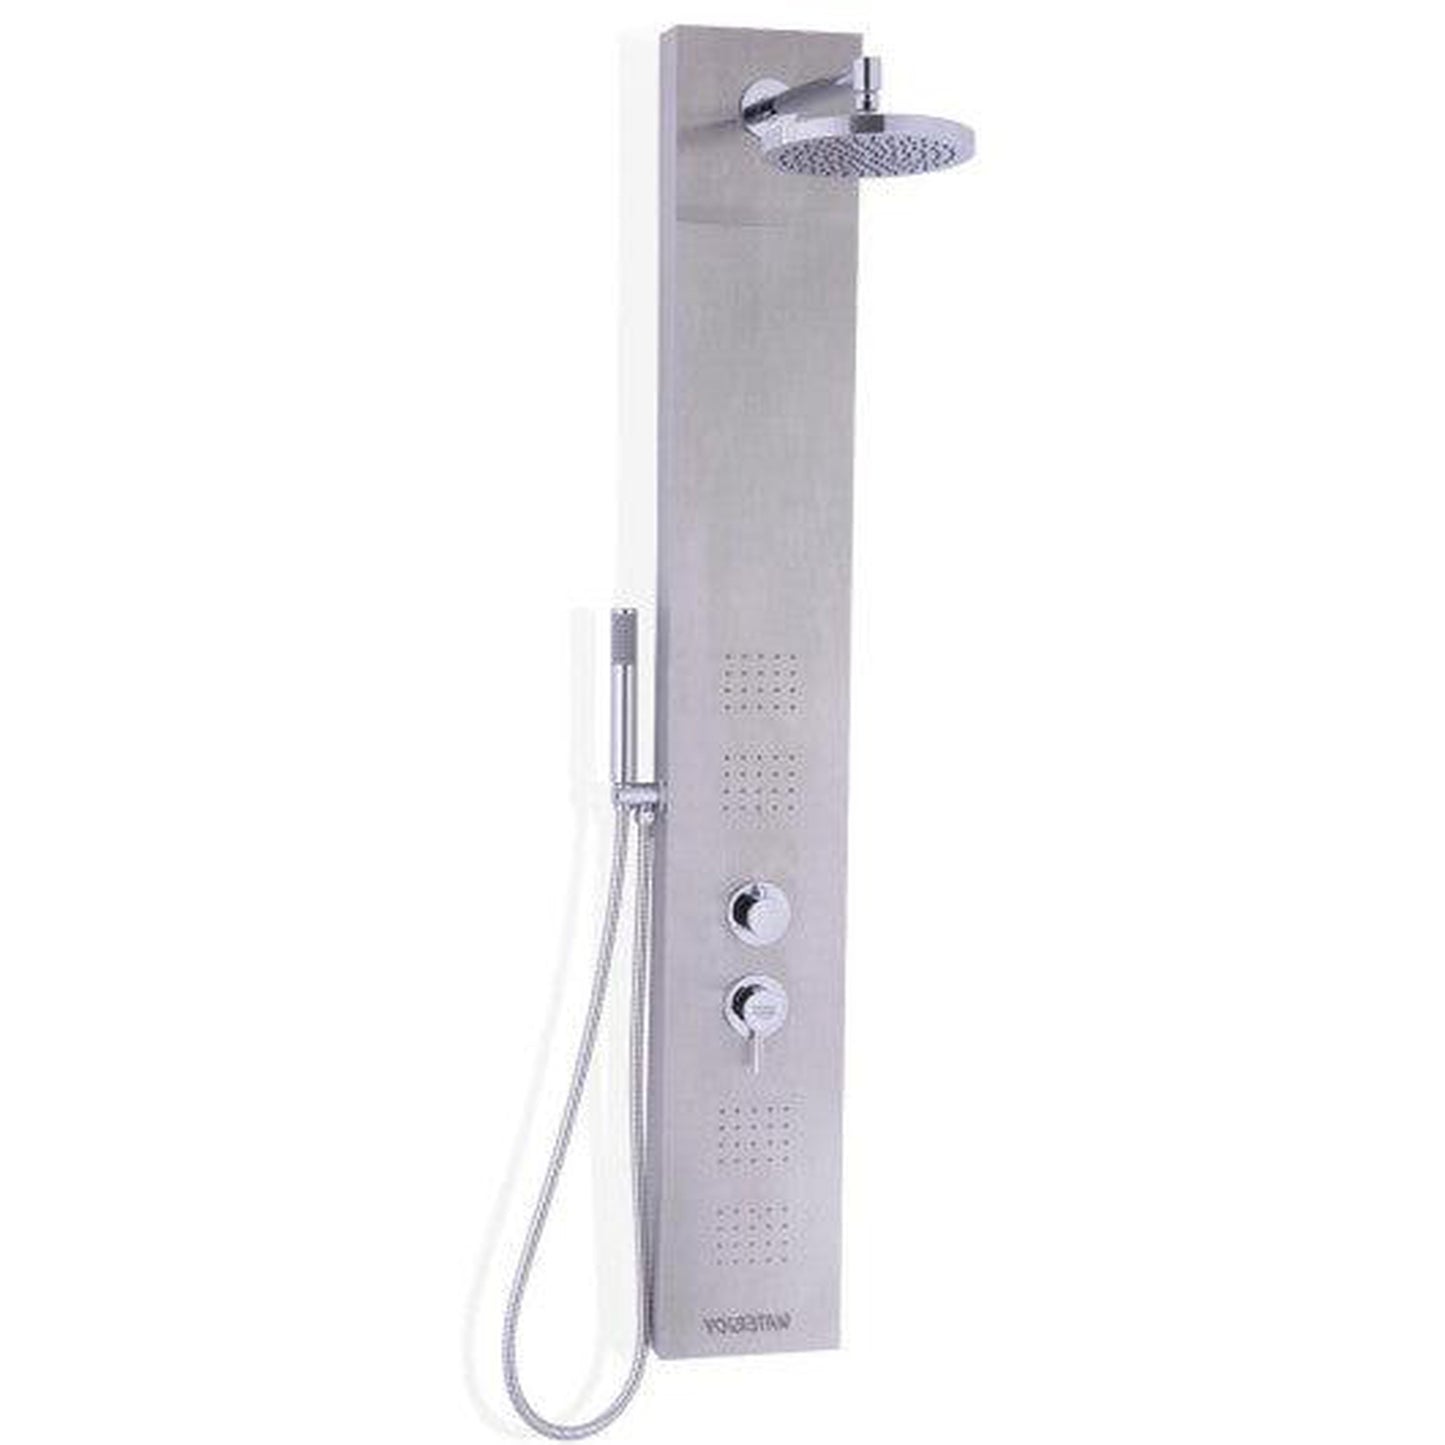 Costway 55" Brushed Stainless Steel Shower Panel with Hand Shower